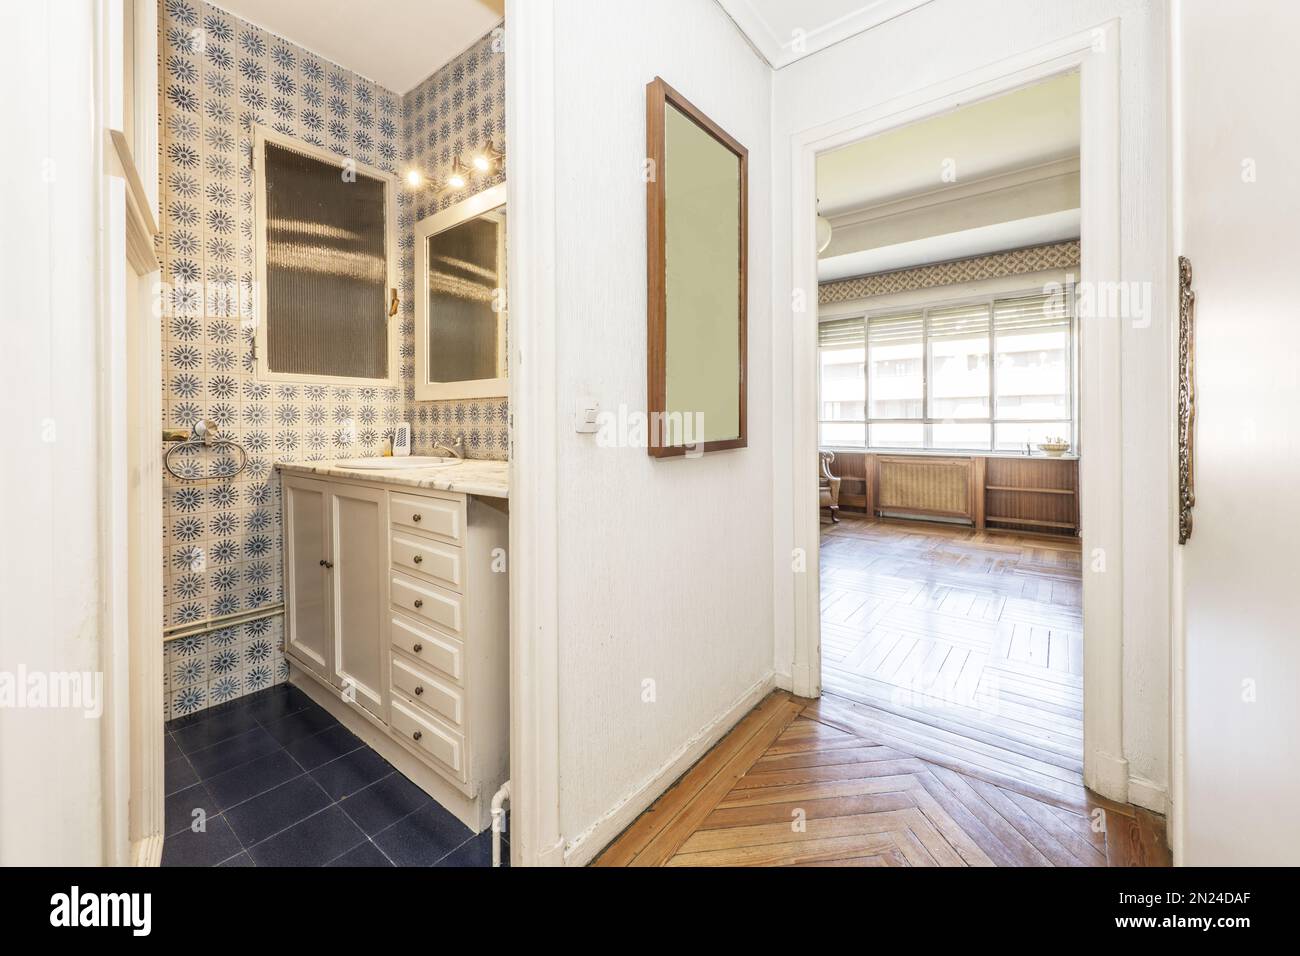 An en-suite toilet in a vintage home with nobel wooden flooring and white cabinets in the bathroom with lots of drawers Stock Photo